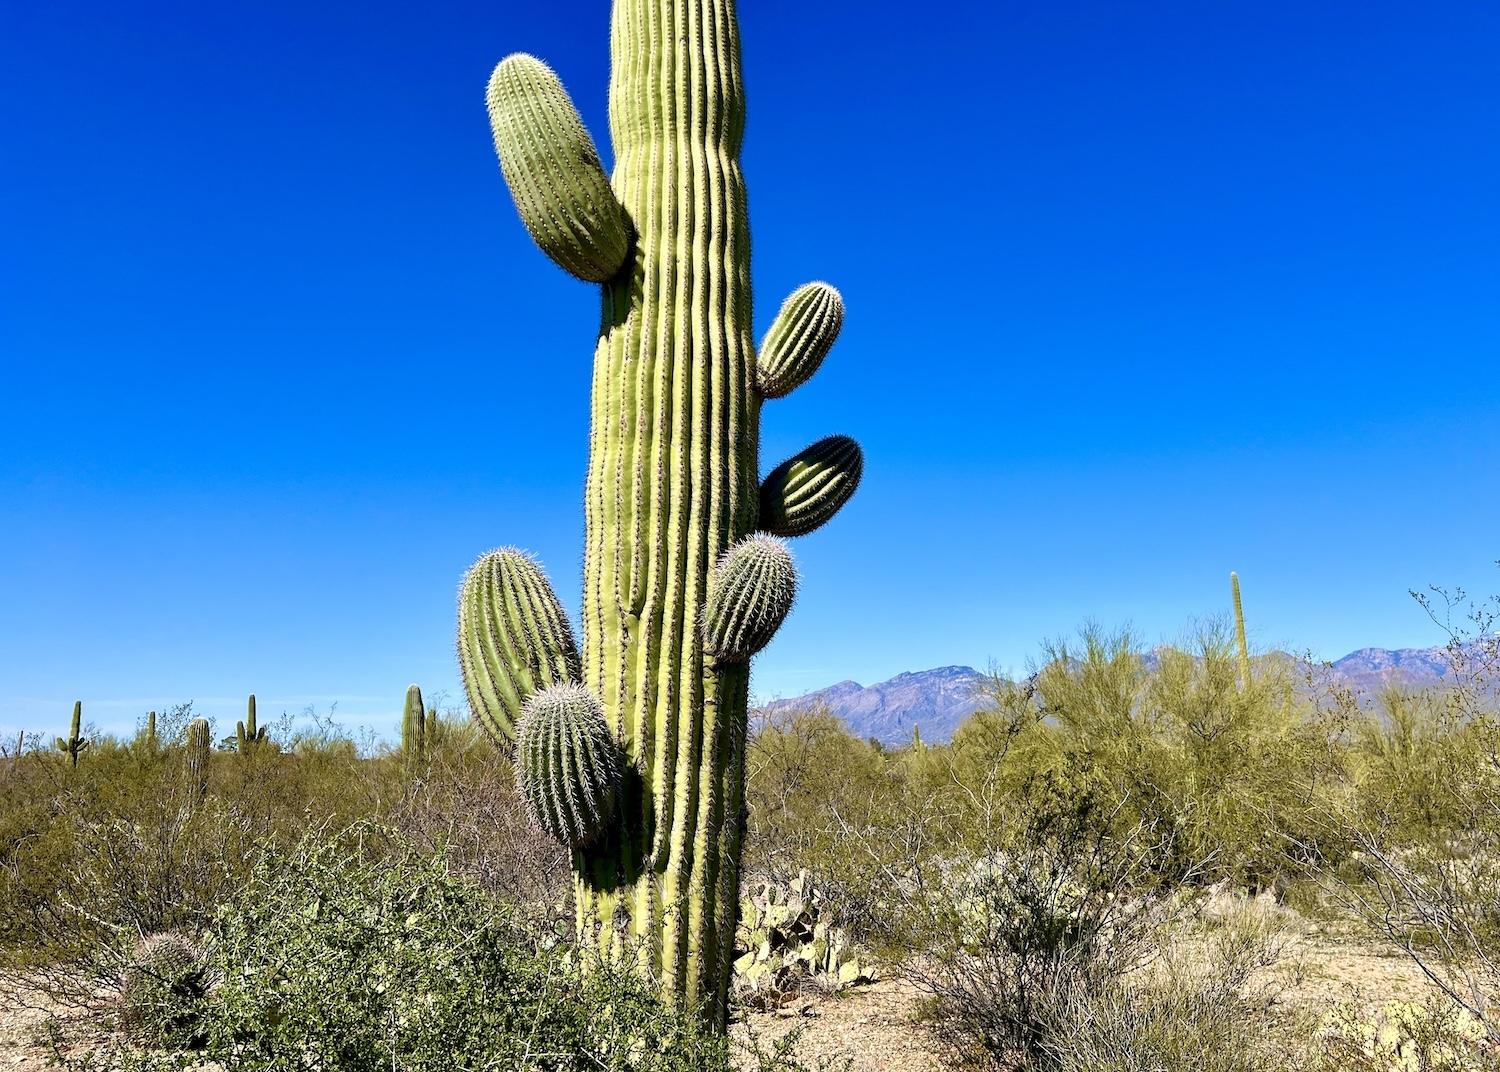 Saguaro National Park in Tucson is one of seven national parks where U.S. Poet Laureate Ada Limón will visit and create poetry installations.